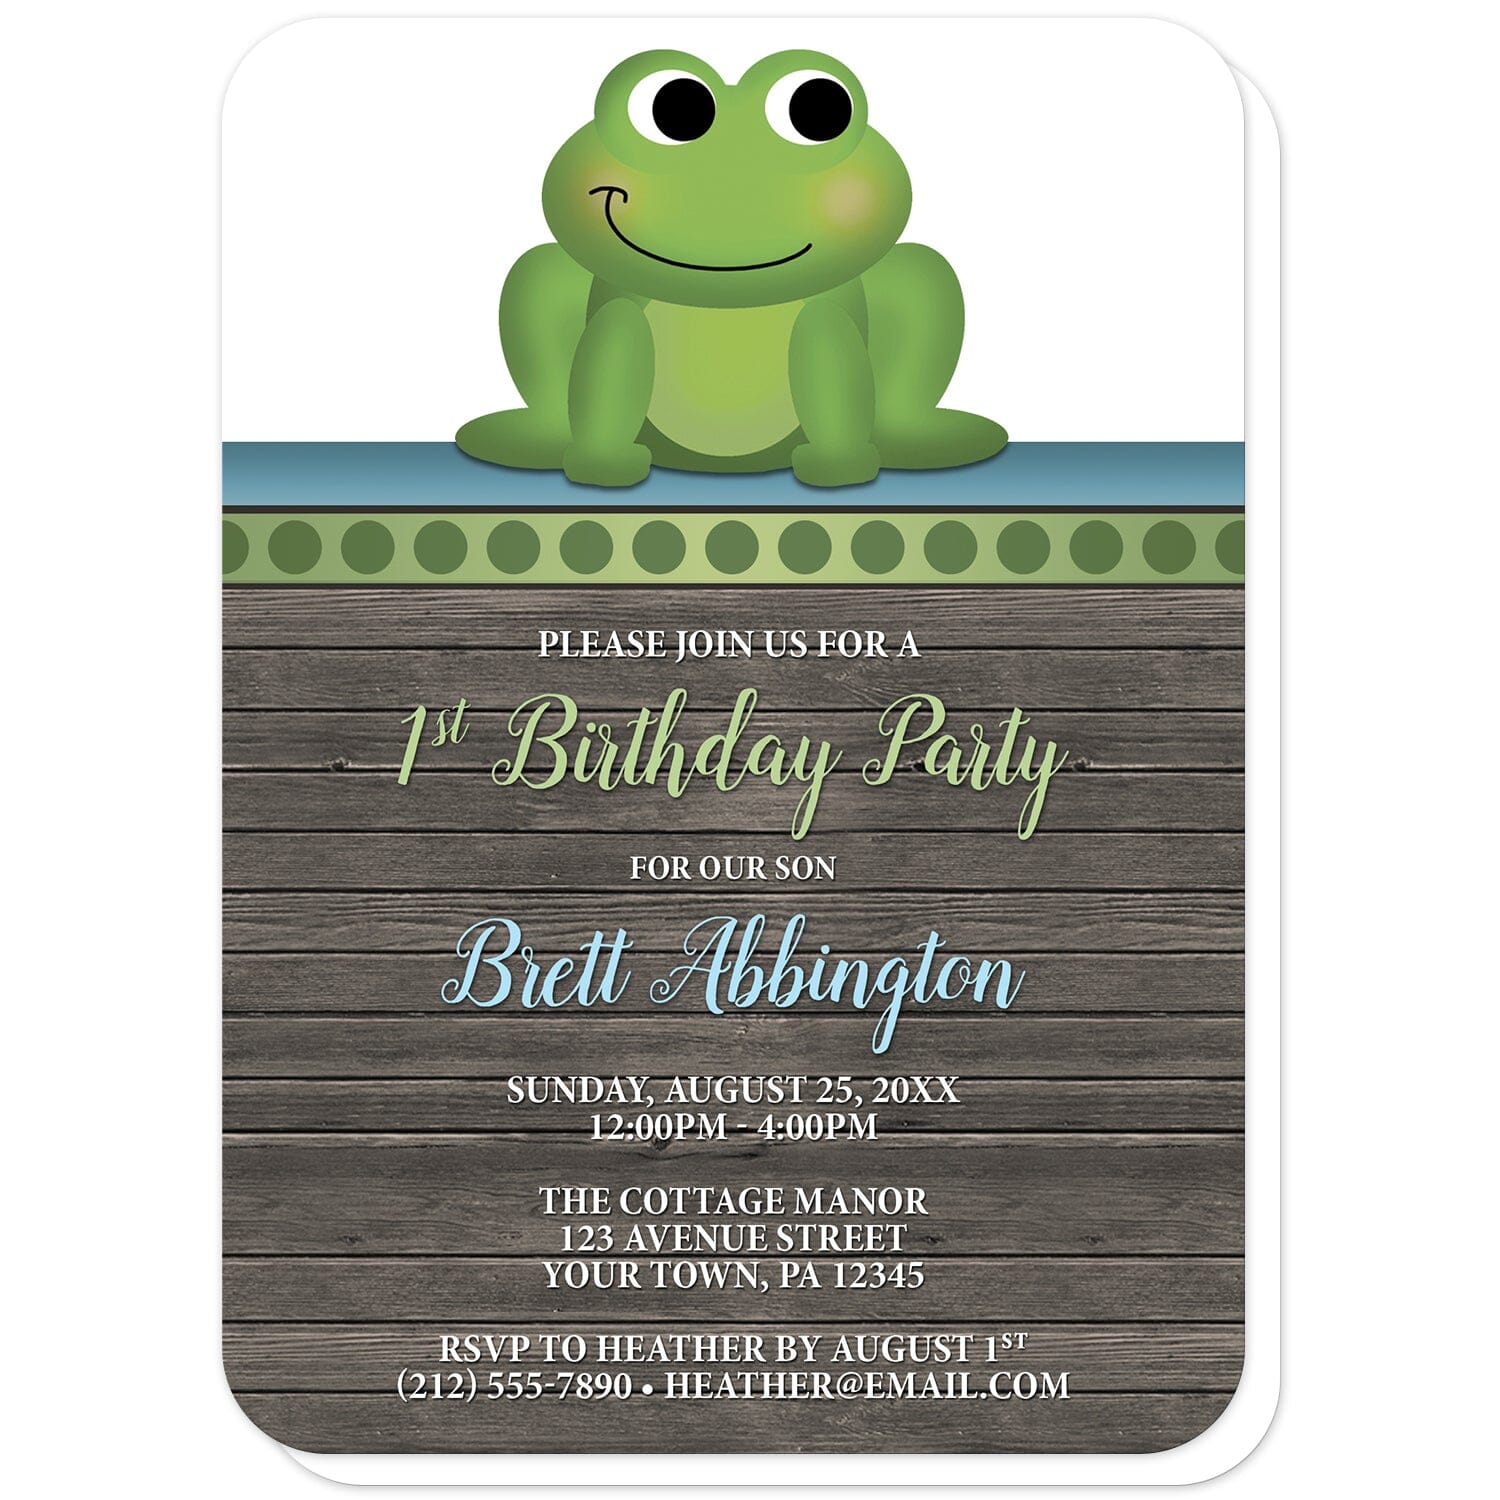 Cute Frog Green Rustic Wood 1st Birthday Invitations (with rounded corners) at Artistically Invited. Cute frog green rustic wood 1st birthday invitations with an illustration of an adorable green frog on a polka dot green stripe at the top of the invitations. Your personalized 1st birthday party details are custom printed in green, blue, and white over a rustic brown wood background. Use can them for your child's 1st birthday or any age. 